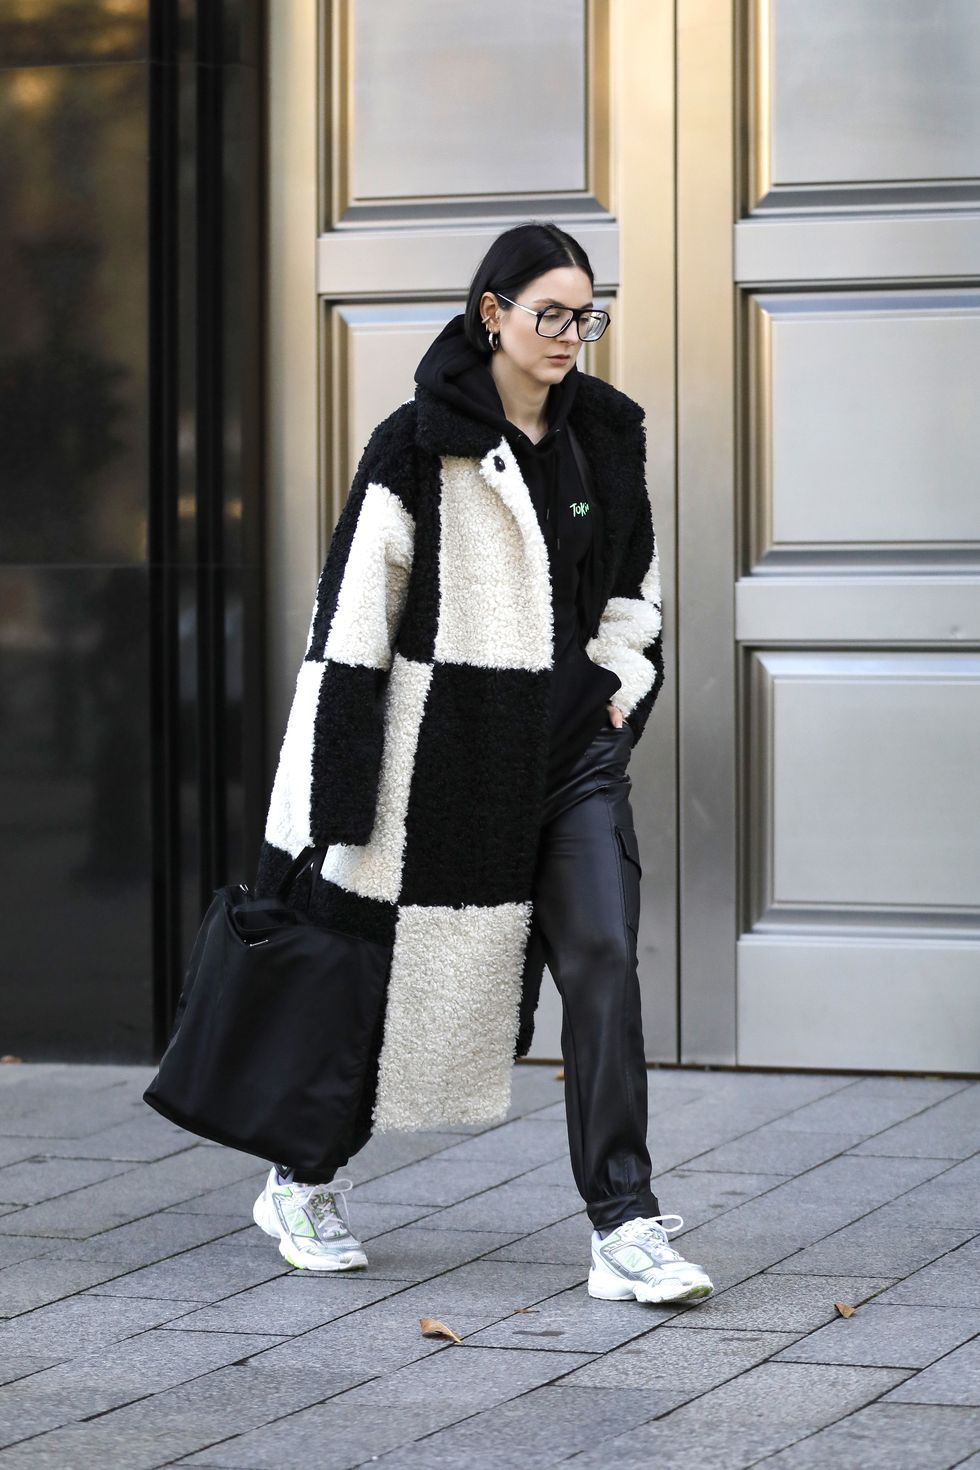 duesseldorf, germany   november 15 influencer maria barteczko, wearing a black and white checkered faux fur oversized coat by stand studio, a black hoodie by tokio hotel, black faux leather cargo pants by zara, white sneaker by new balance, a black nylon shopper bag by prada and black frame oversized aviator glasses by victoria beckham during a street style shooting on november 15, 2020 in duesseldorf, germany photo by streetstyleshootersgetty images